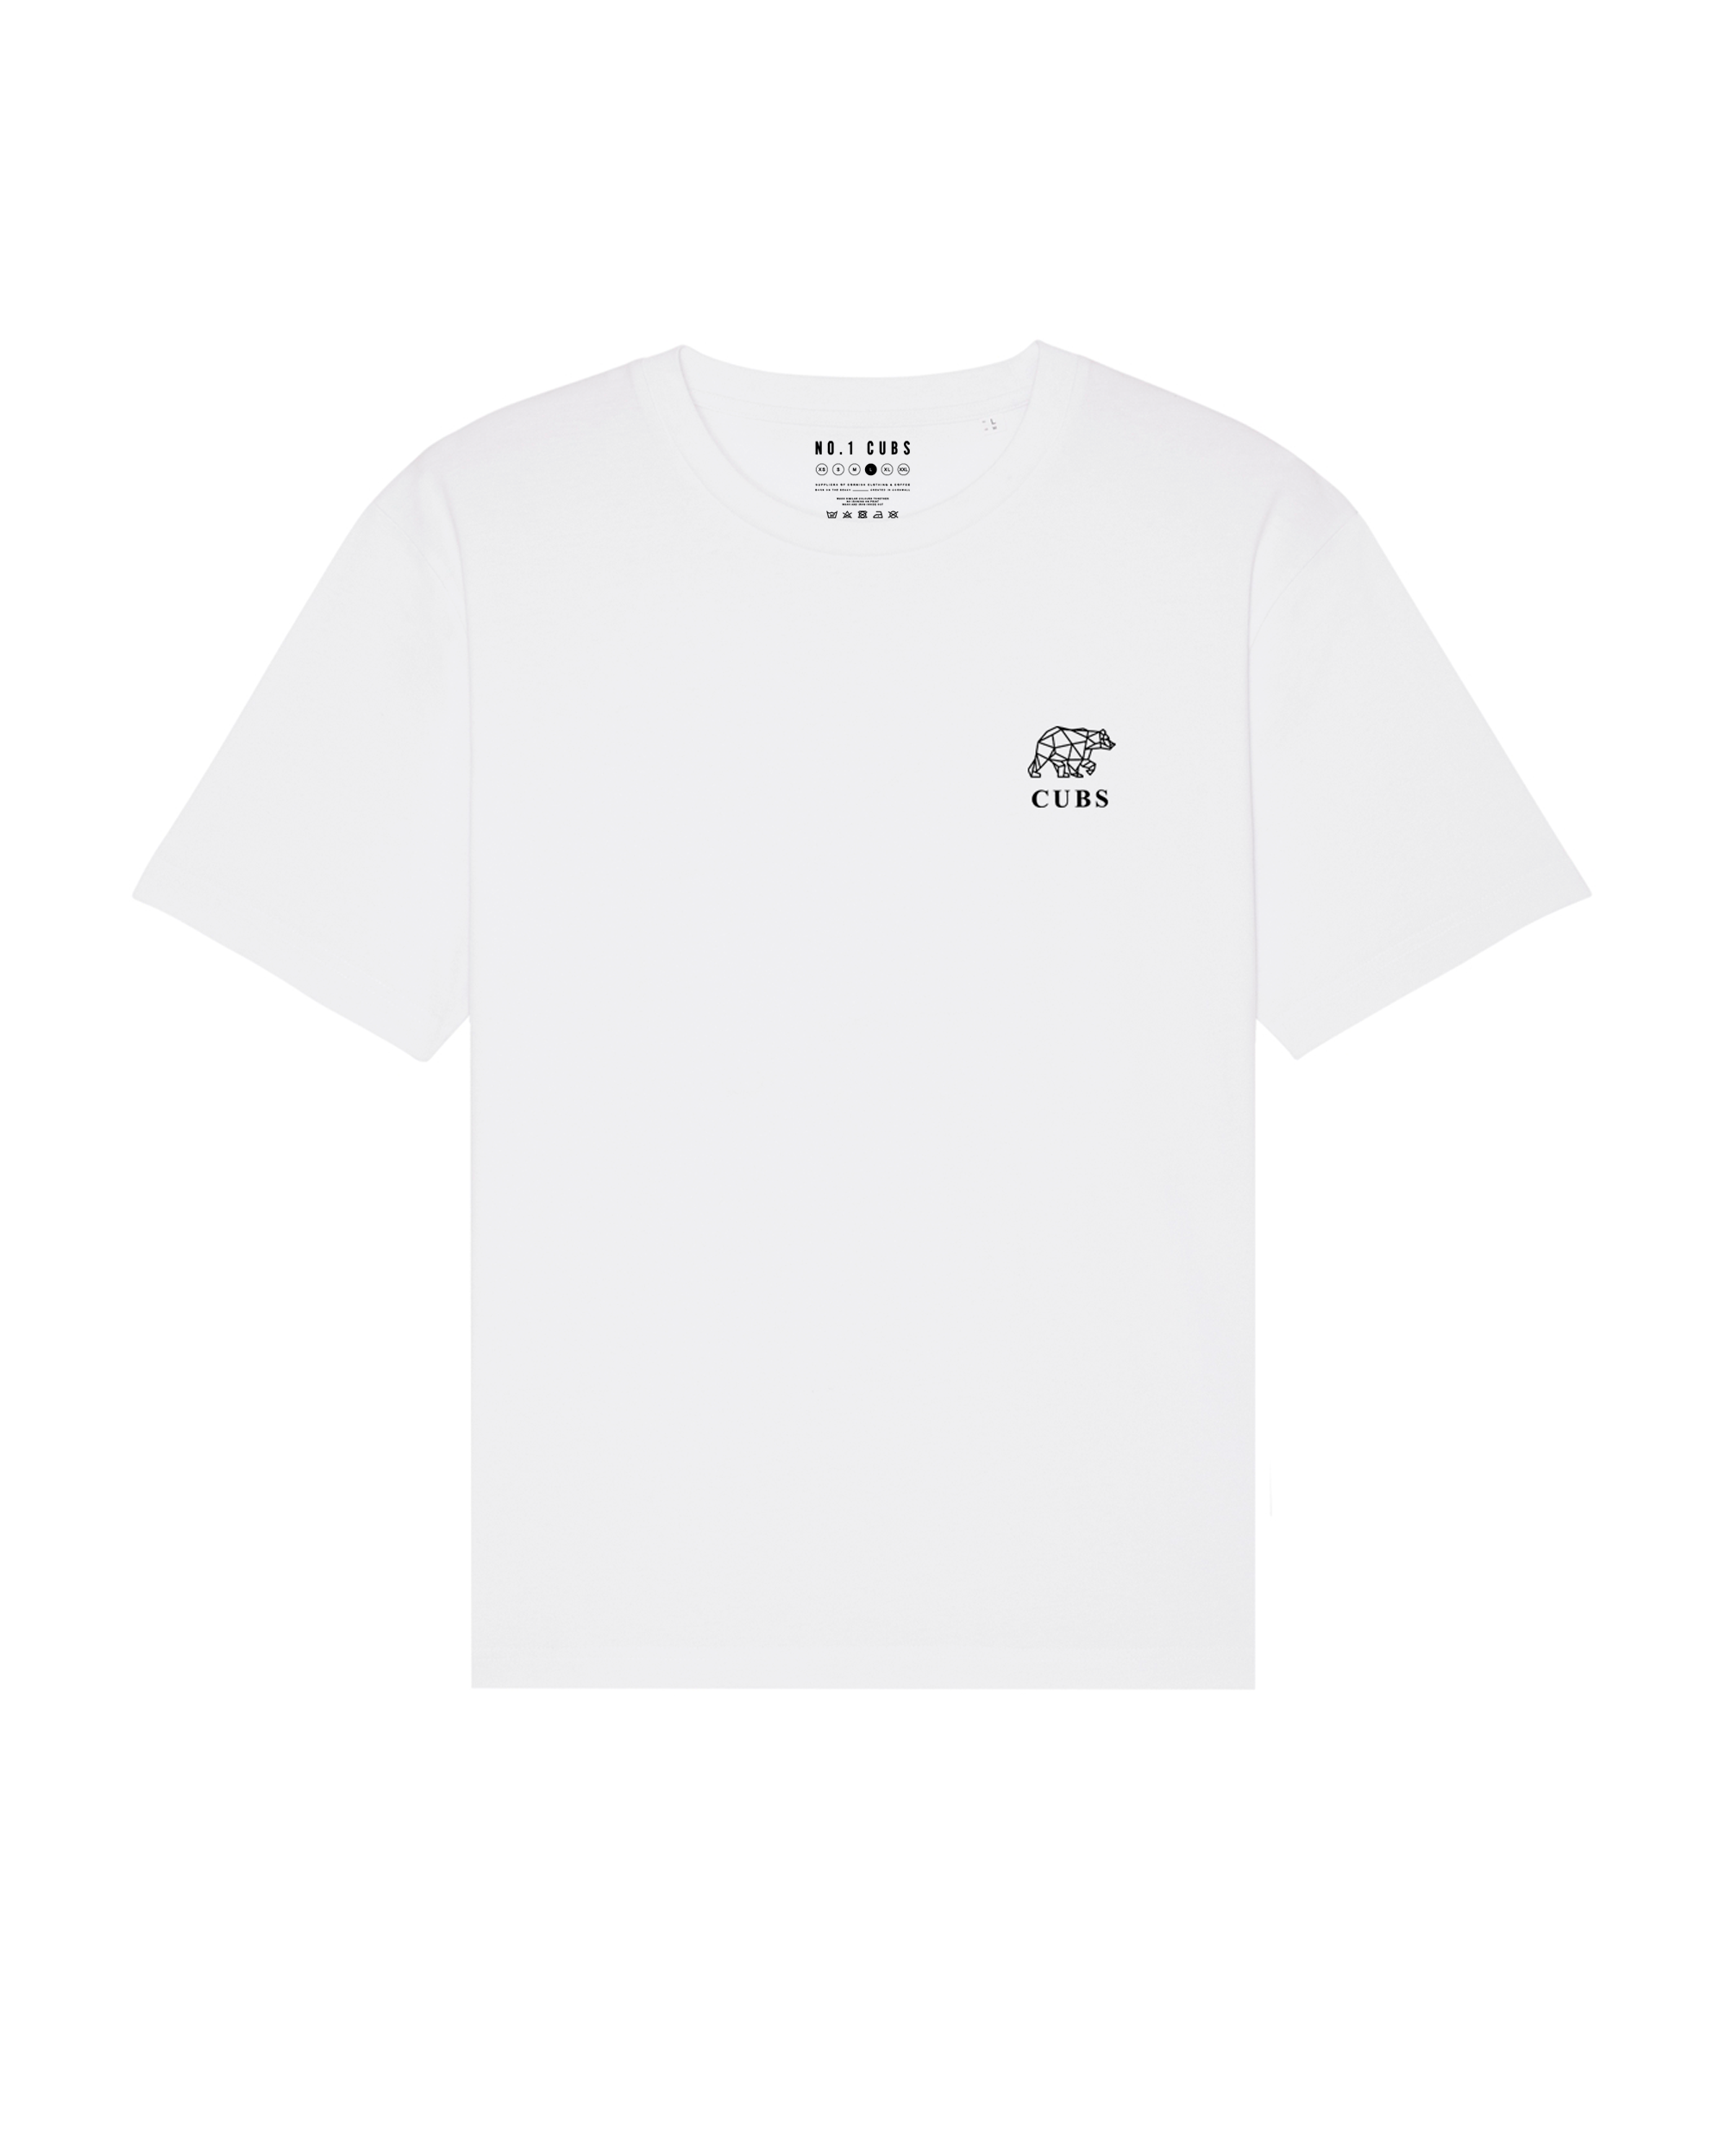 White Logo T-shirt by No1 Cubs featuring a simple and stylish design with the No1 Cubs logo on the chest. Made from premium, comfortable fabric, perfect for casual wear. Available in various sizes for all genders. Shop No1 Cubs for high-quality, branded casual clothing